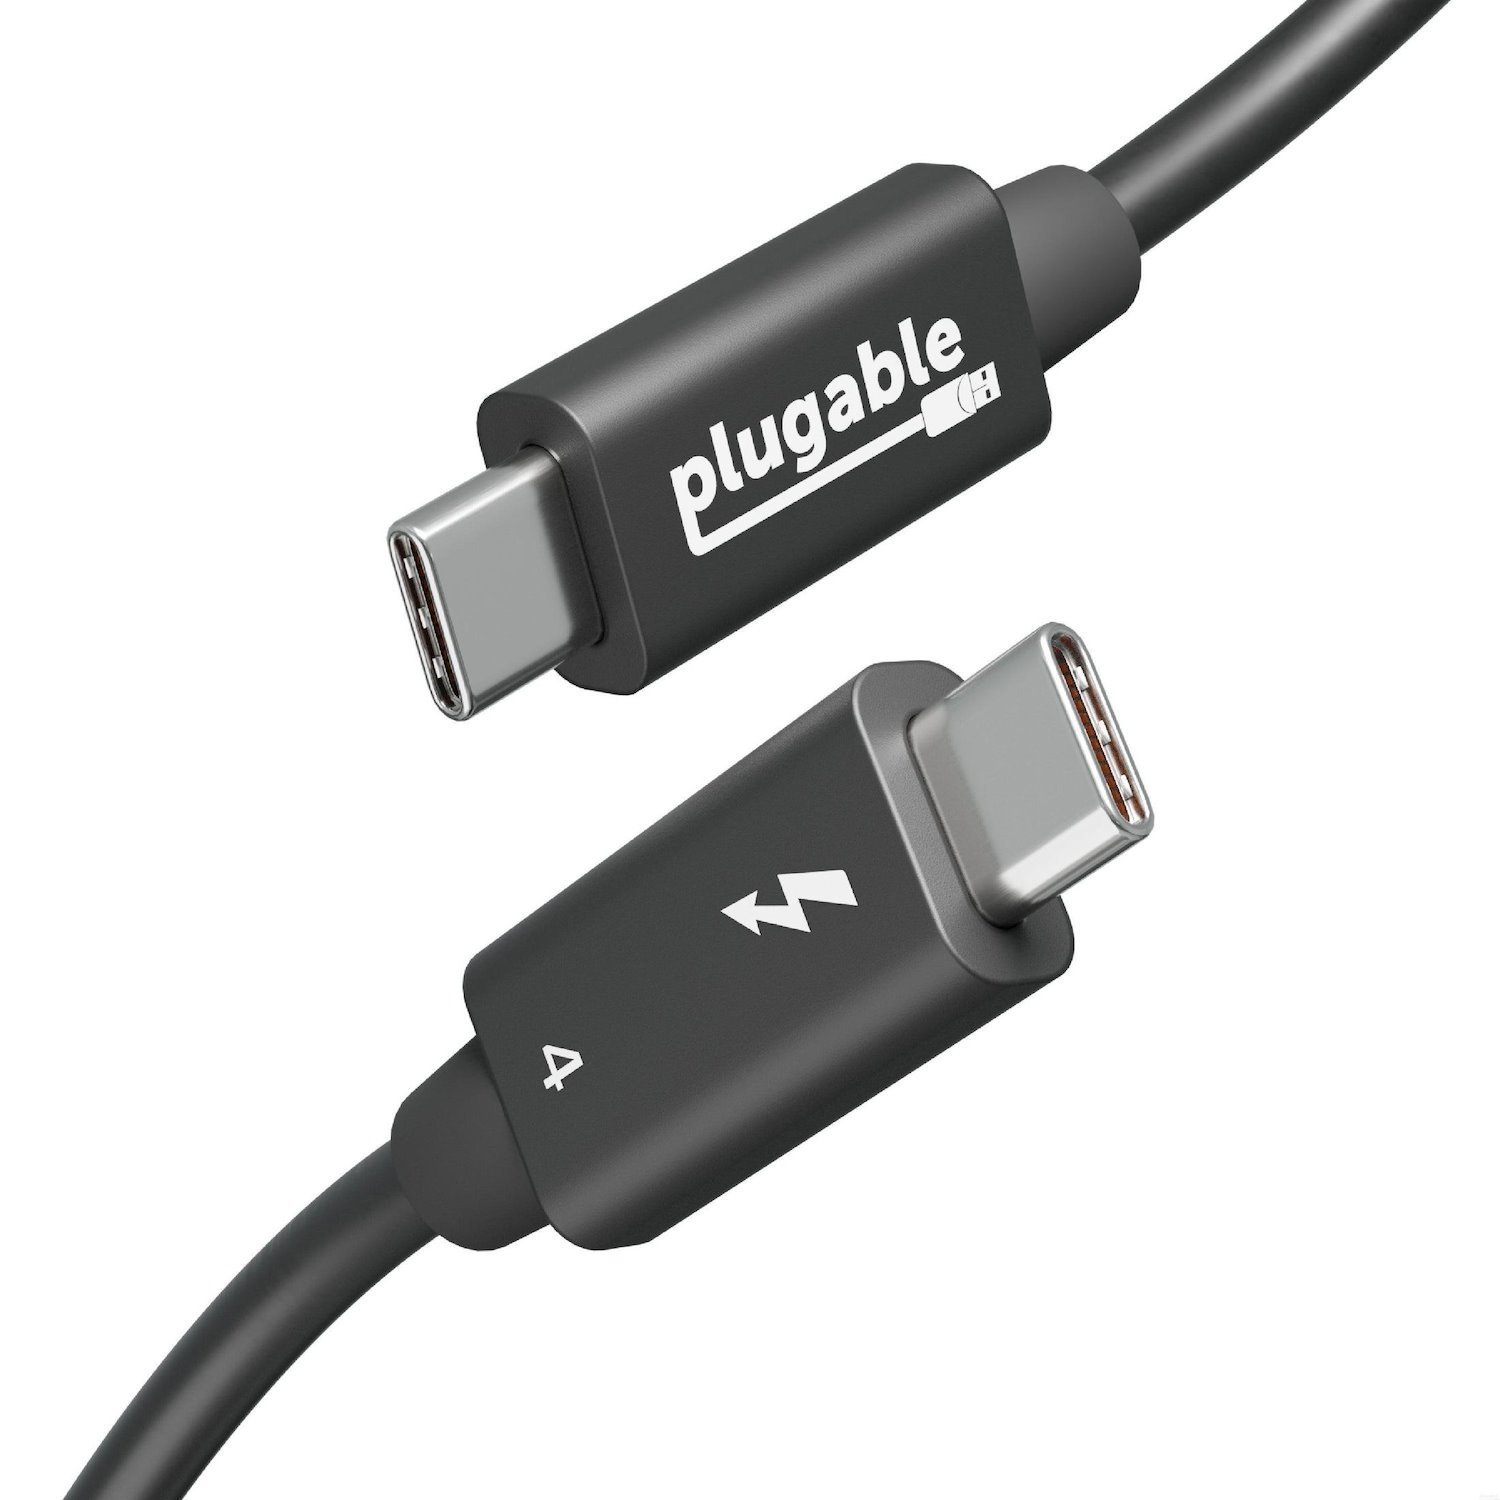 Plugable Technologies Thunderbolt 4 Cable 240W Charging TBT4 Certified 3.3 FT [1M] 40 GBPS (Plugable TBT4 Usb4 240W Epr Cable 3.3FT)